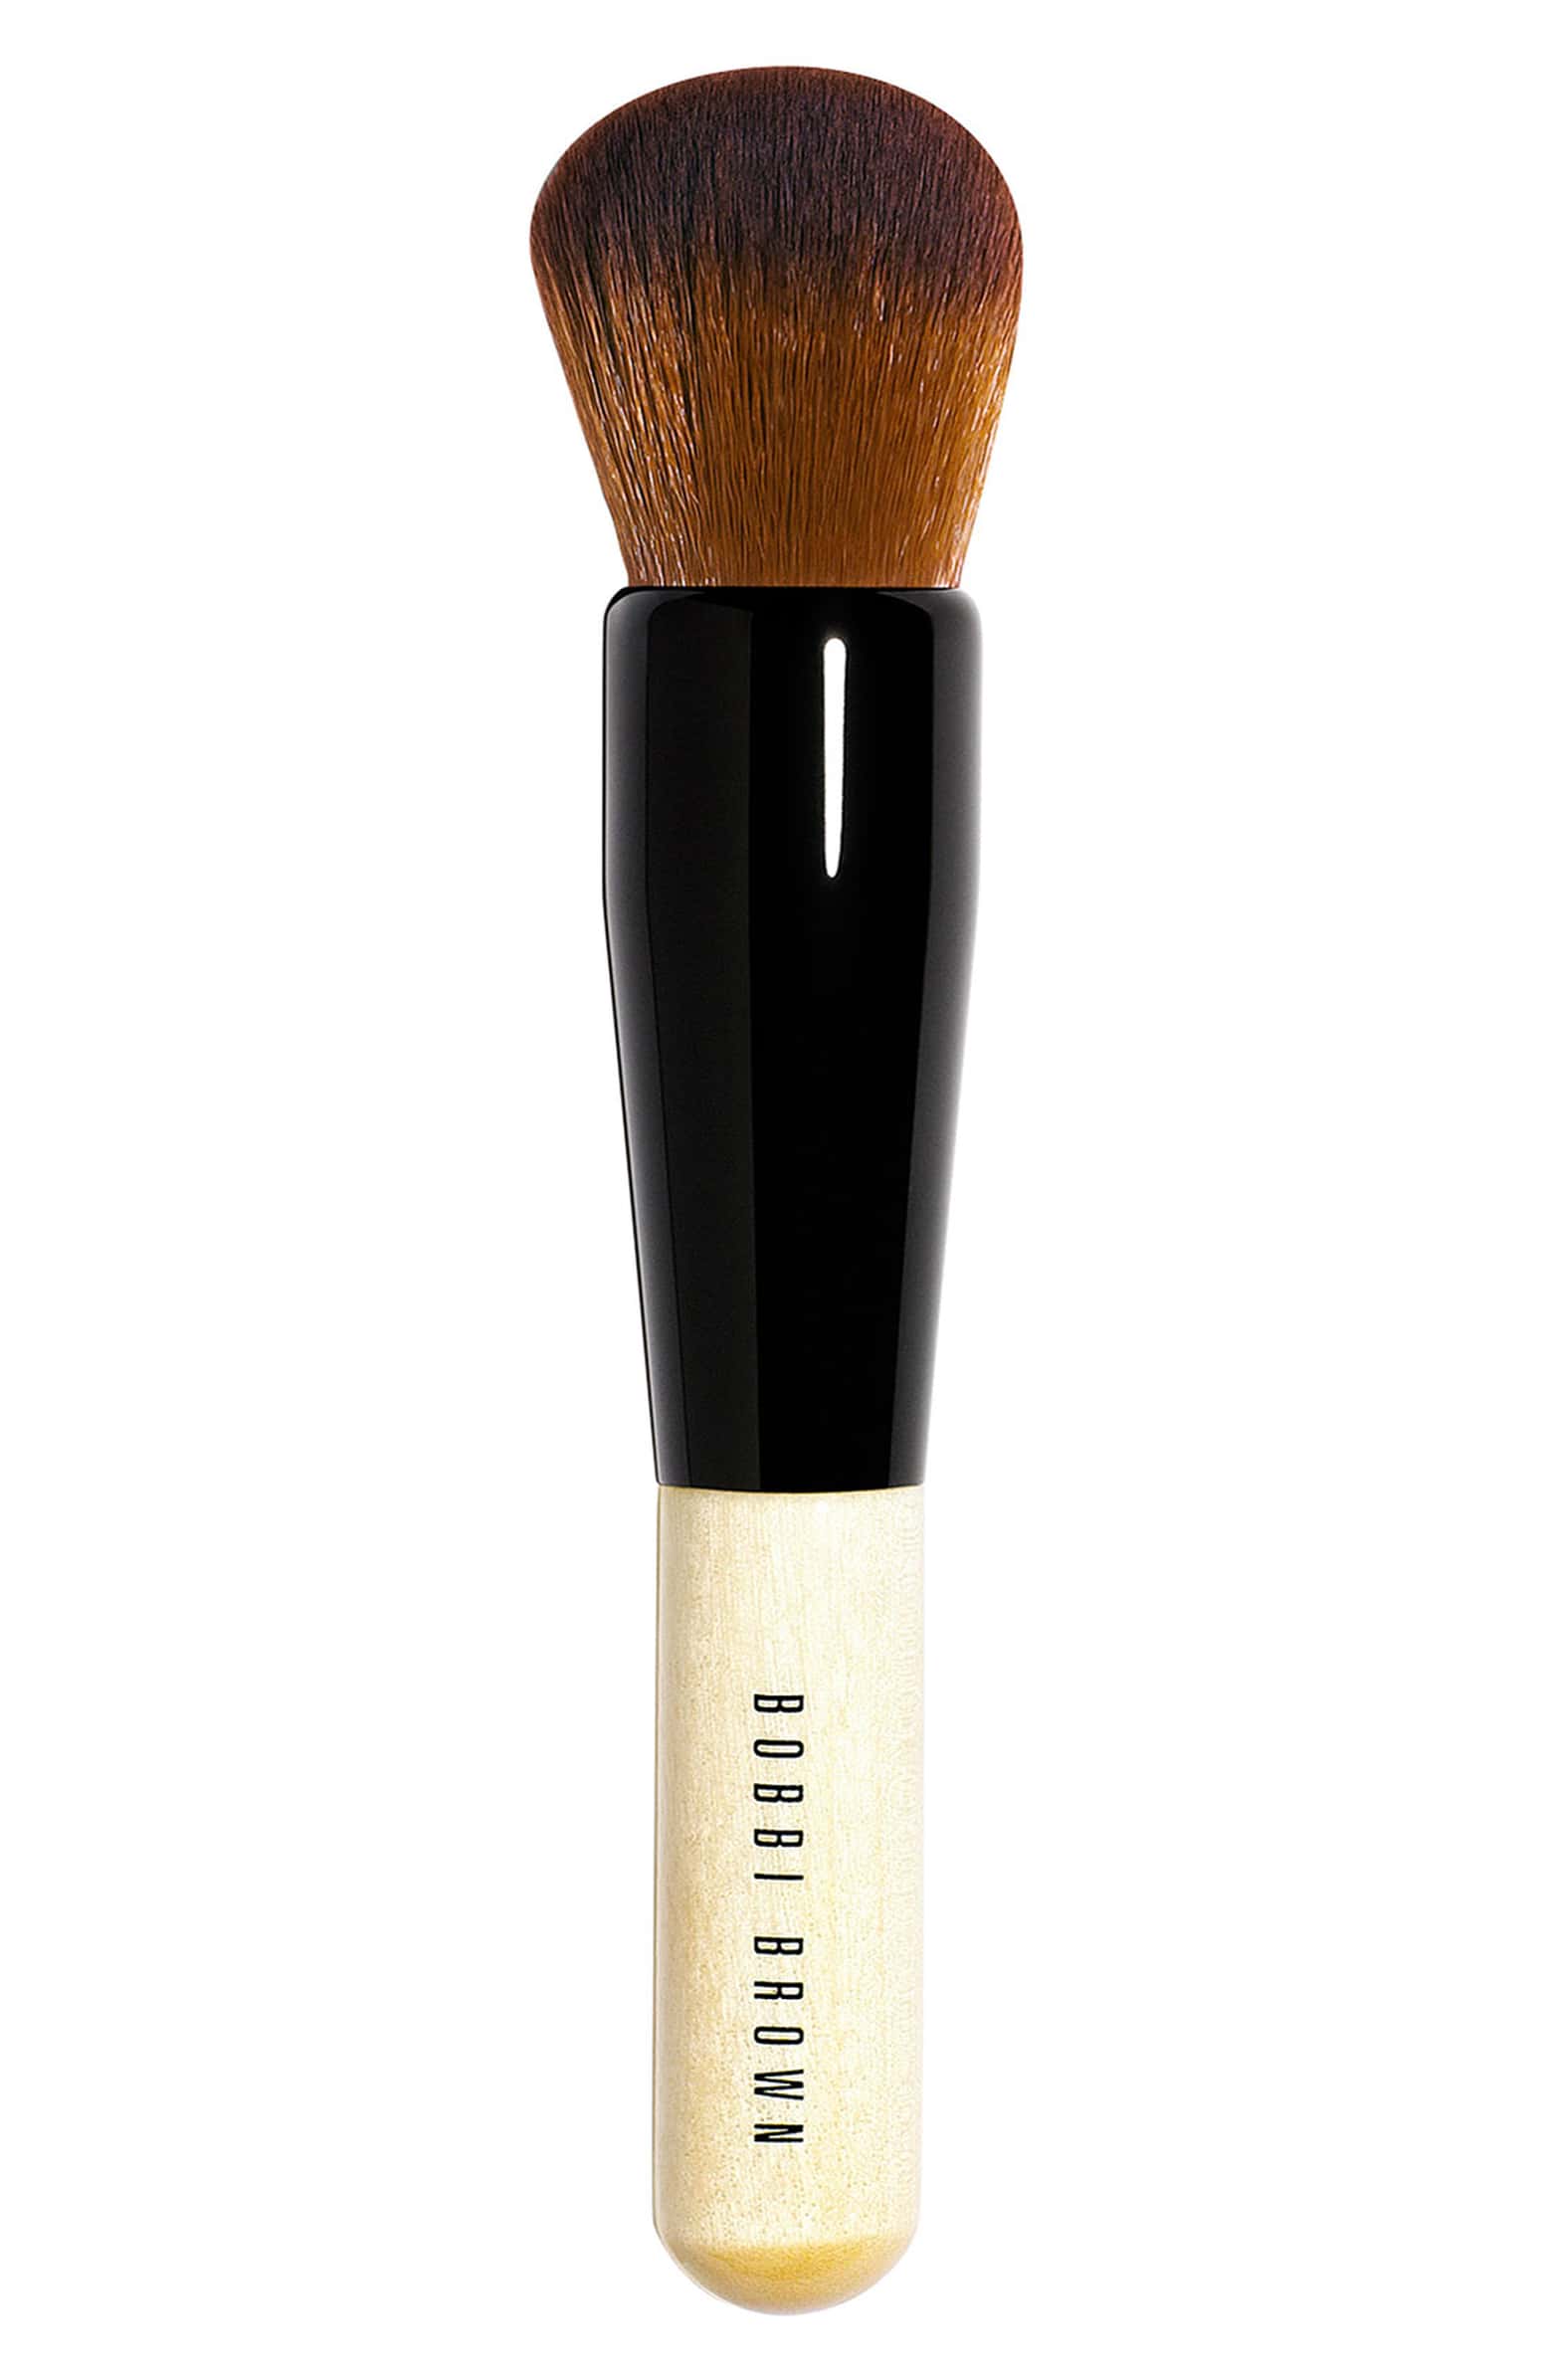 How to clean makeup brushes: Bobbi Brown Full Coverage Face Brush